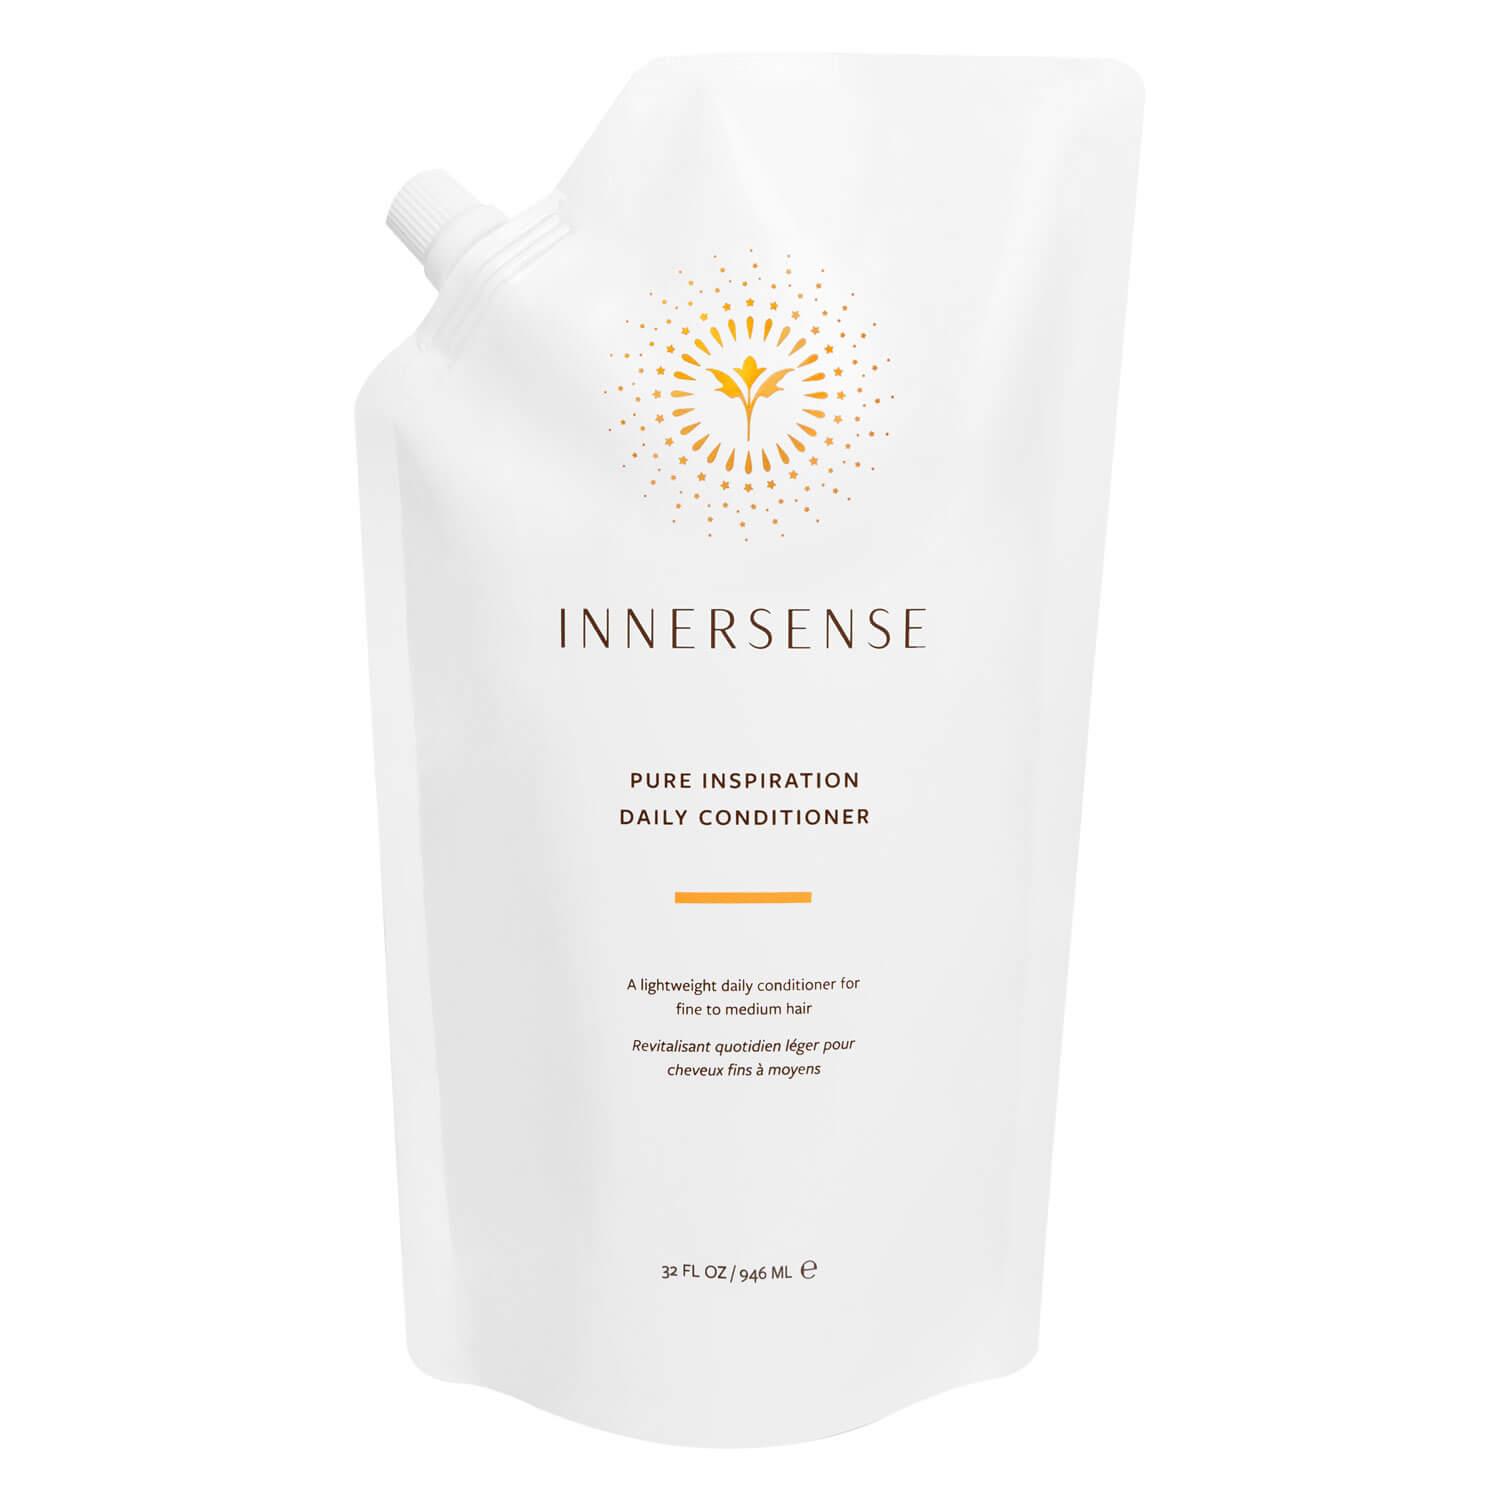 Innersense - Pure Inspiration Daily Conditioner Refill